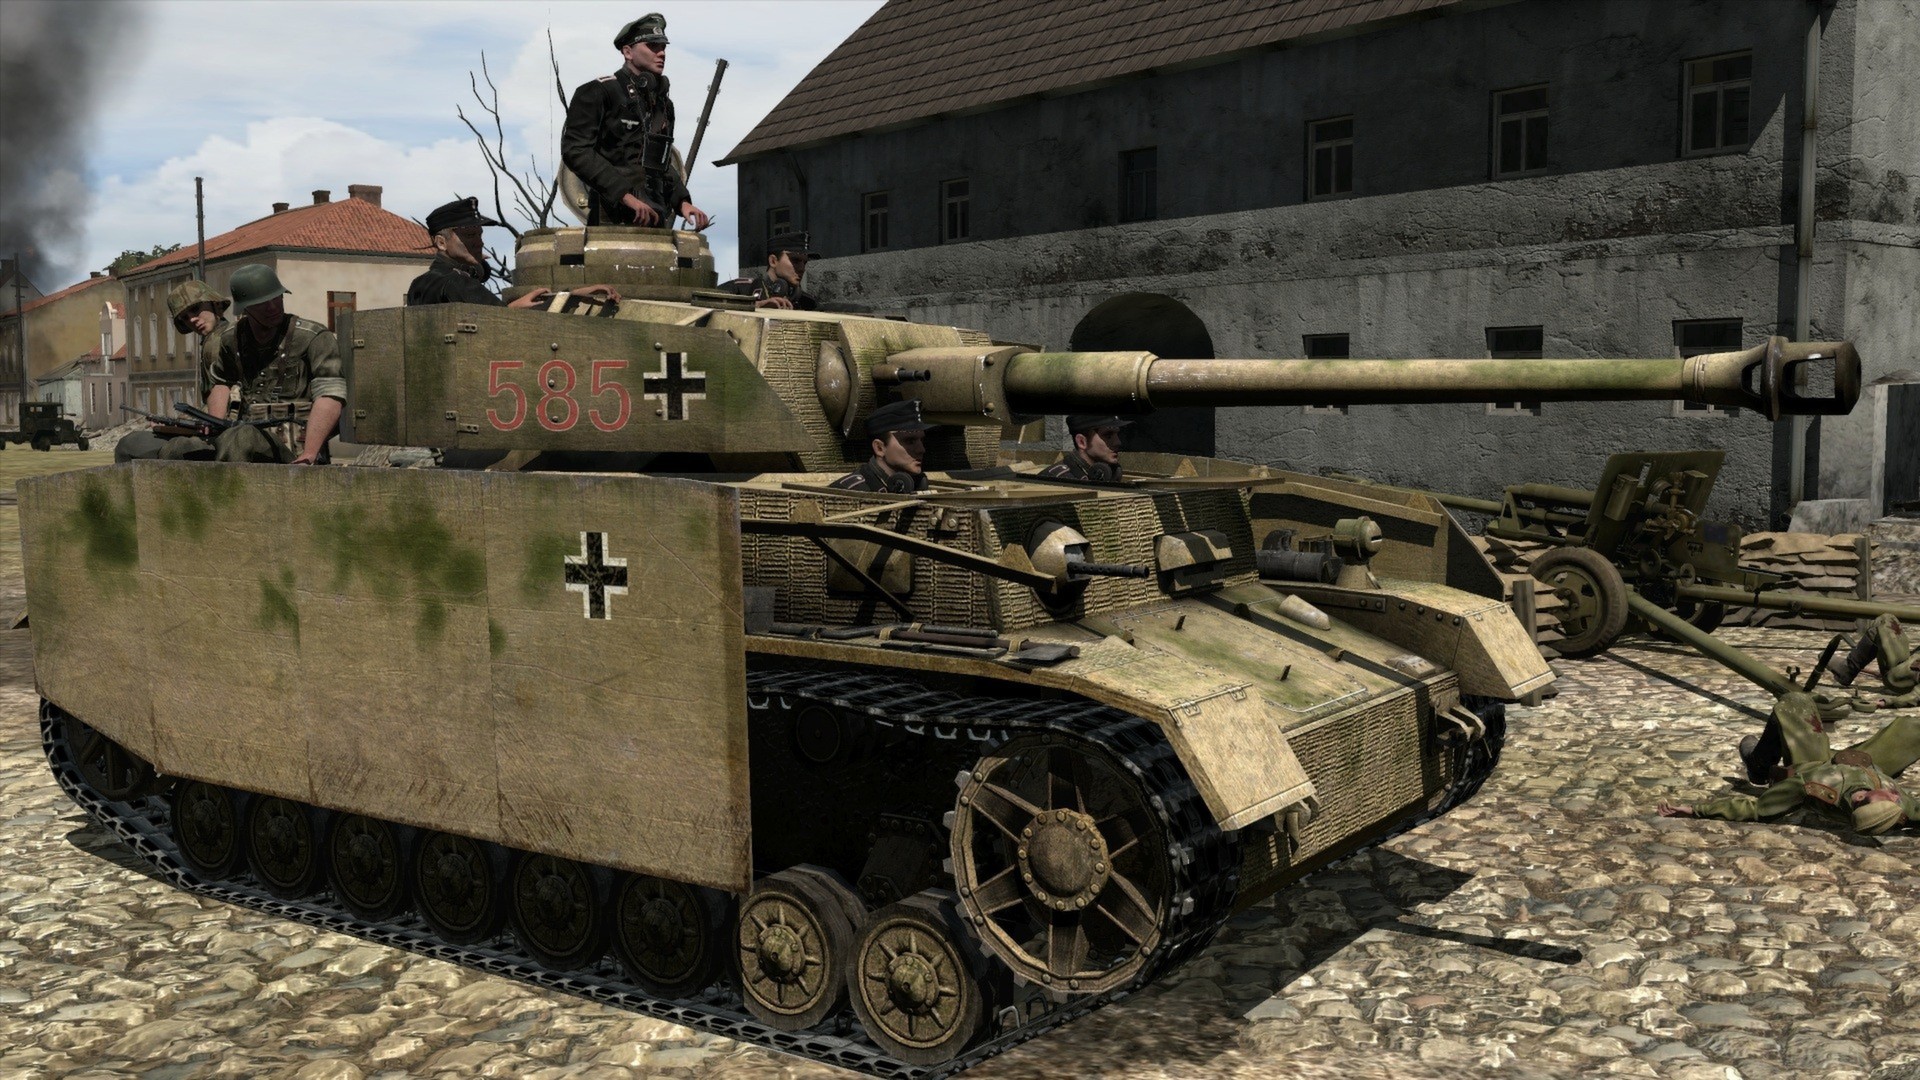 Iron Front Liberation 1944 Backgrounds, Compatible - PC, Mobile, Gadgets| 1920x1080 px